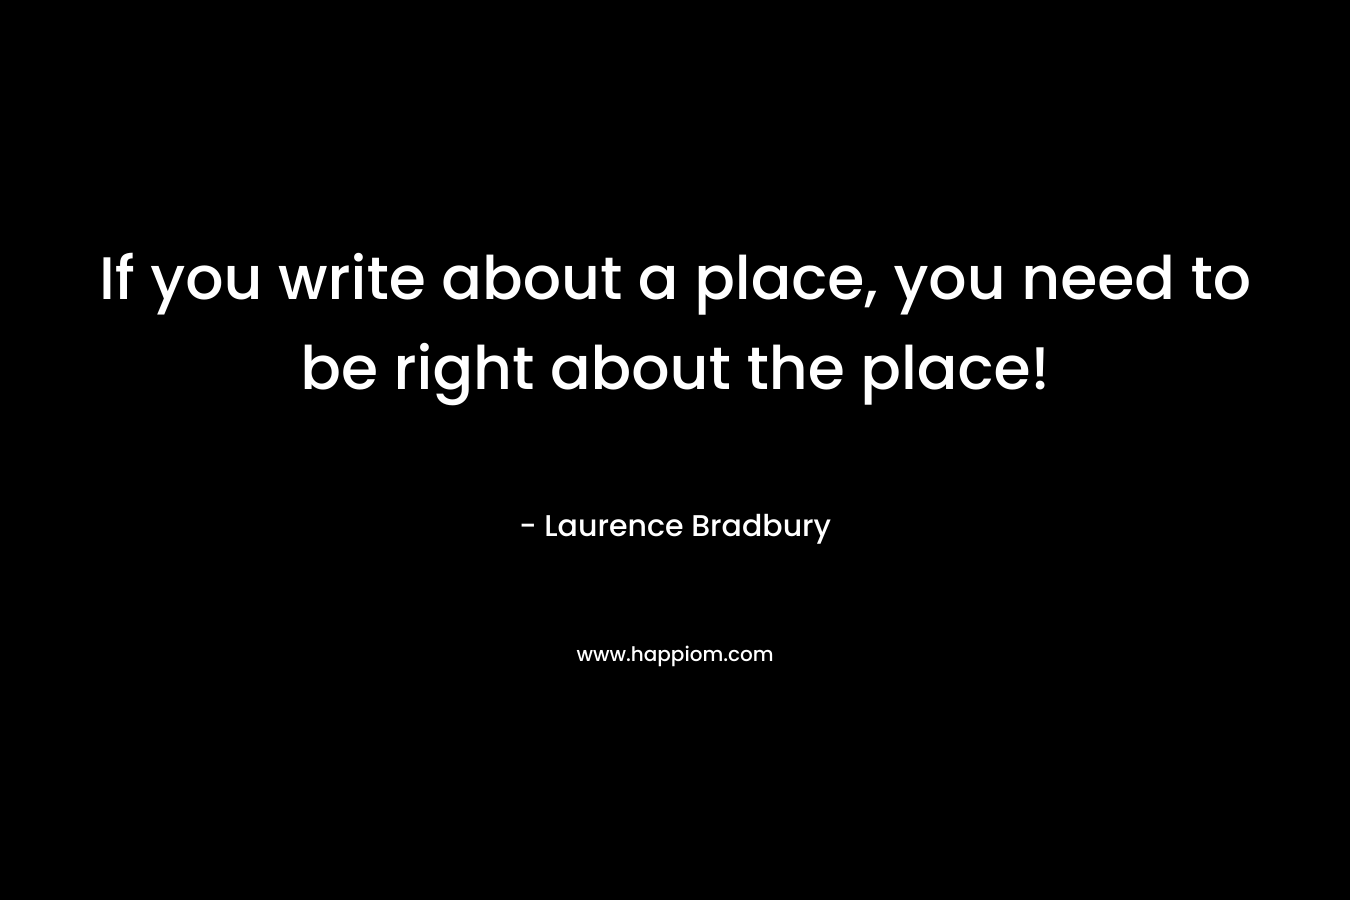 If you write about a place, you need to be right about the place!